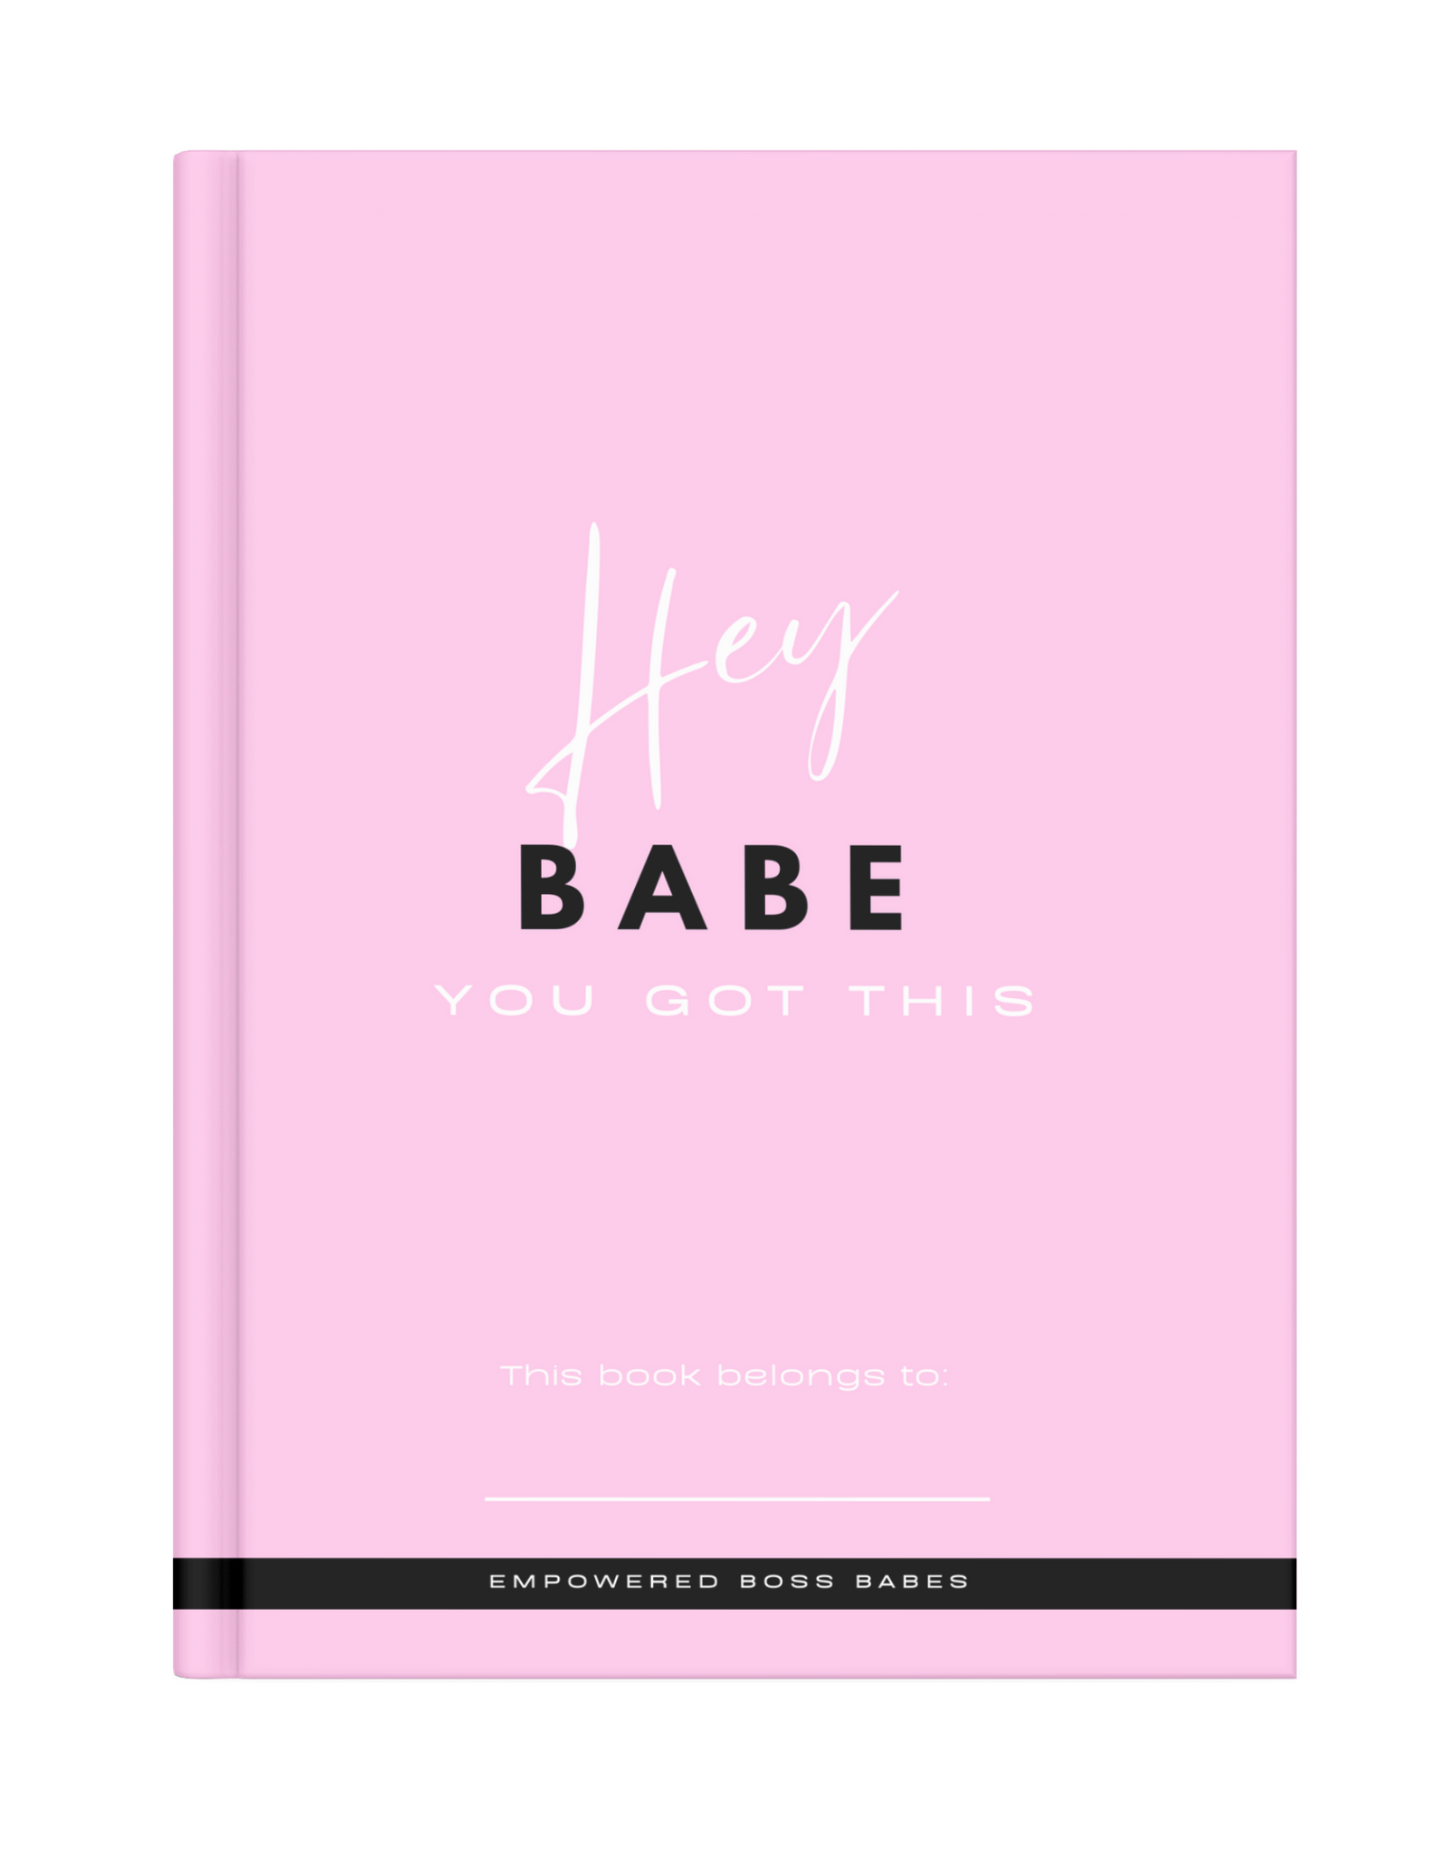 "Hey Babe you got this" 30 Day Self Development journal